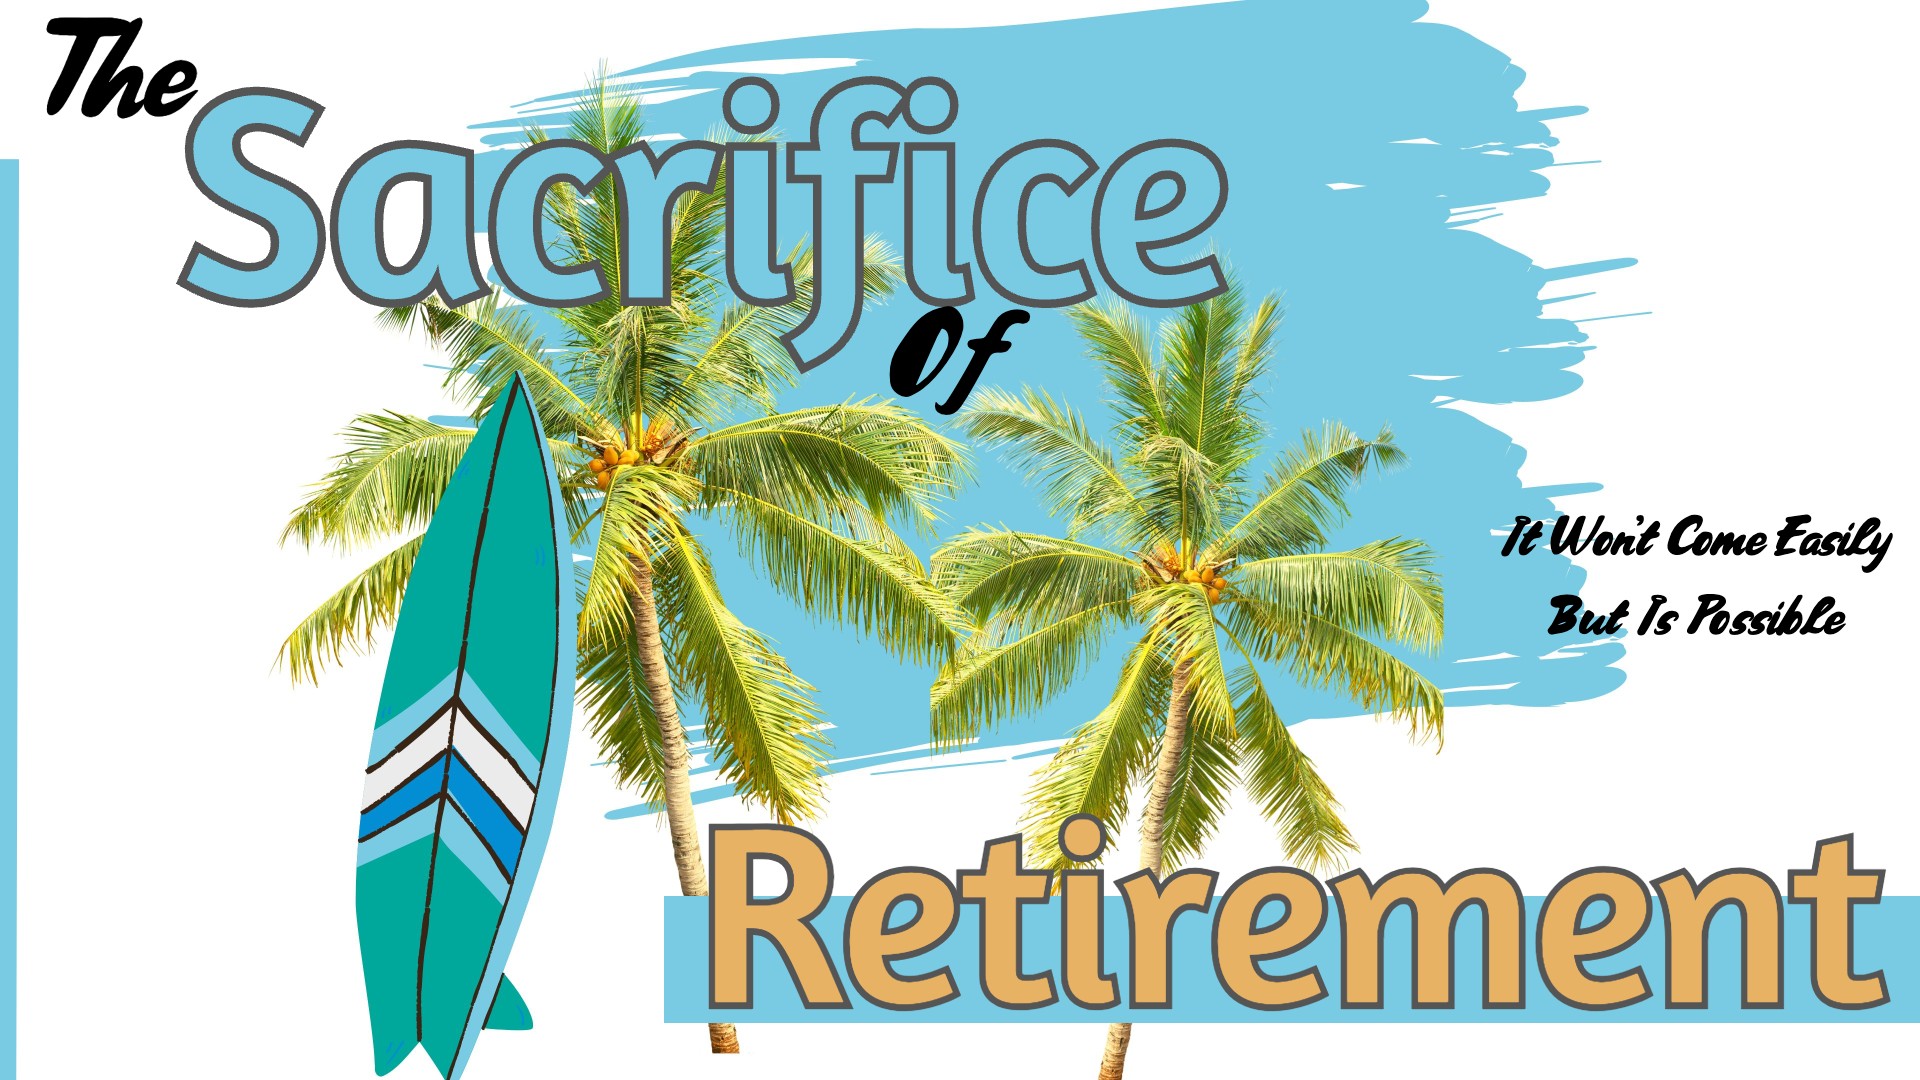 The Sacrifice of Retirement: It Won’t Come Easily But Is Possible